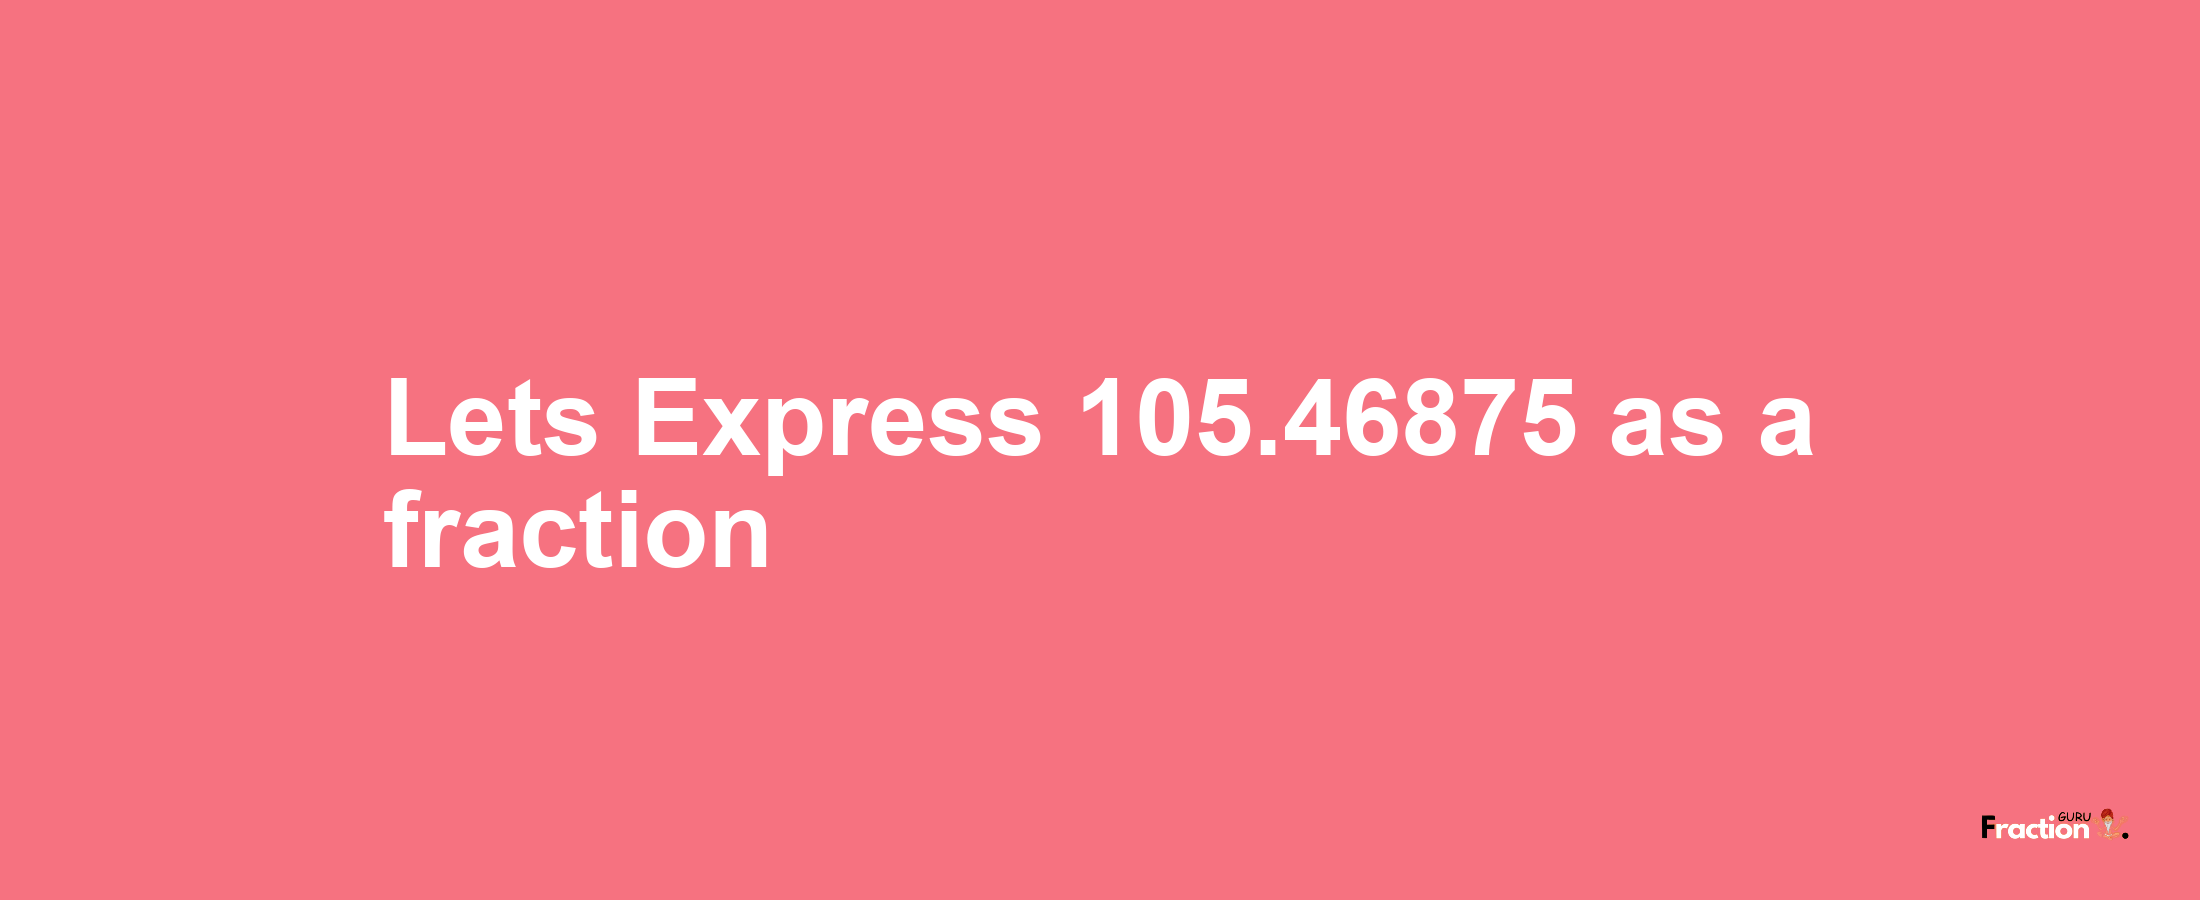 Lets Express 105.46875 as afraction